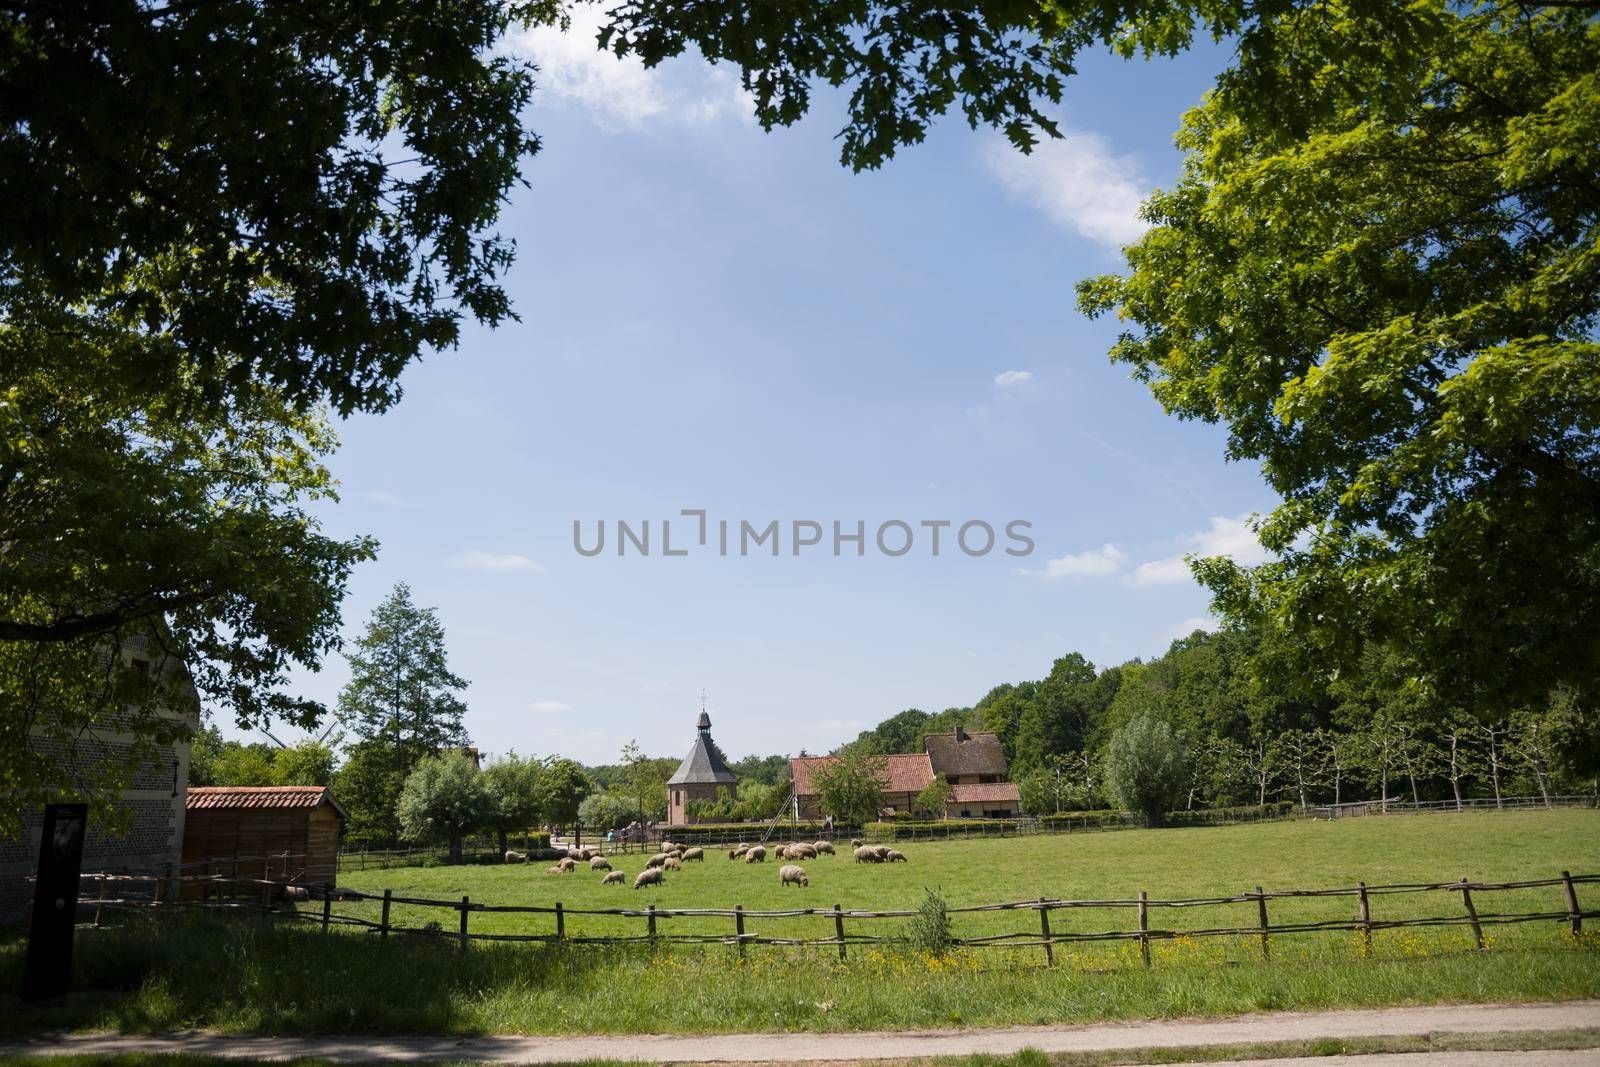 brown sheep graze on an open green meadow in a farming area, rural life, countryside landscape, A flock of sheep grazes on a green pasture on a sunny day, High quality photo